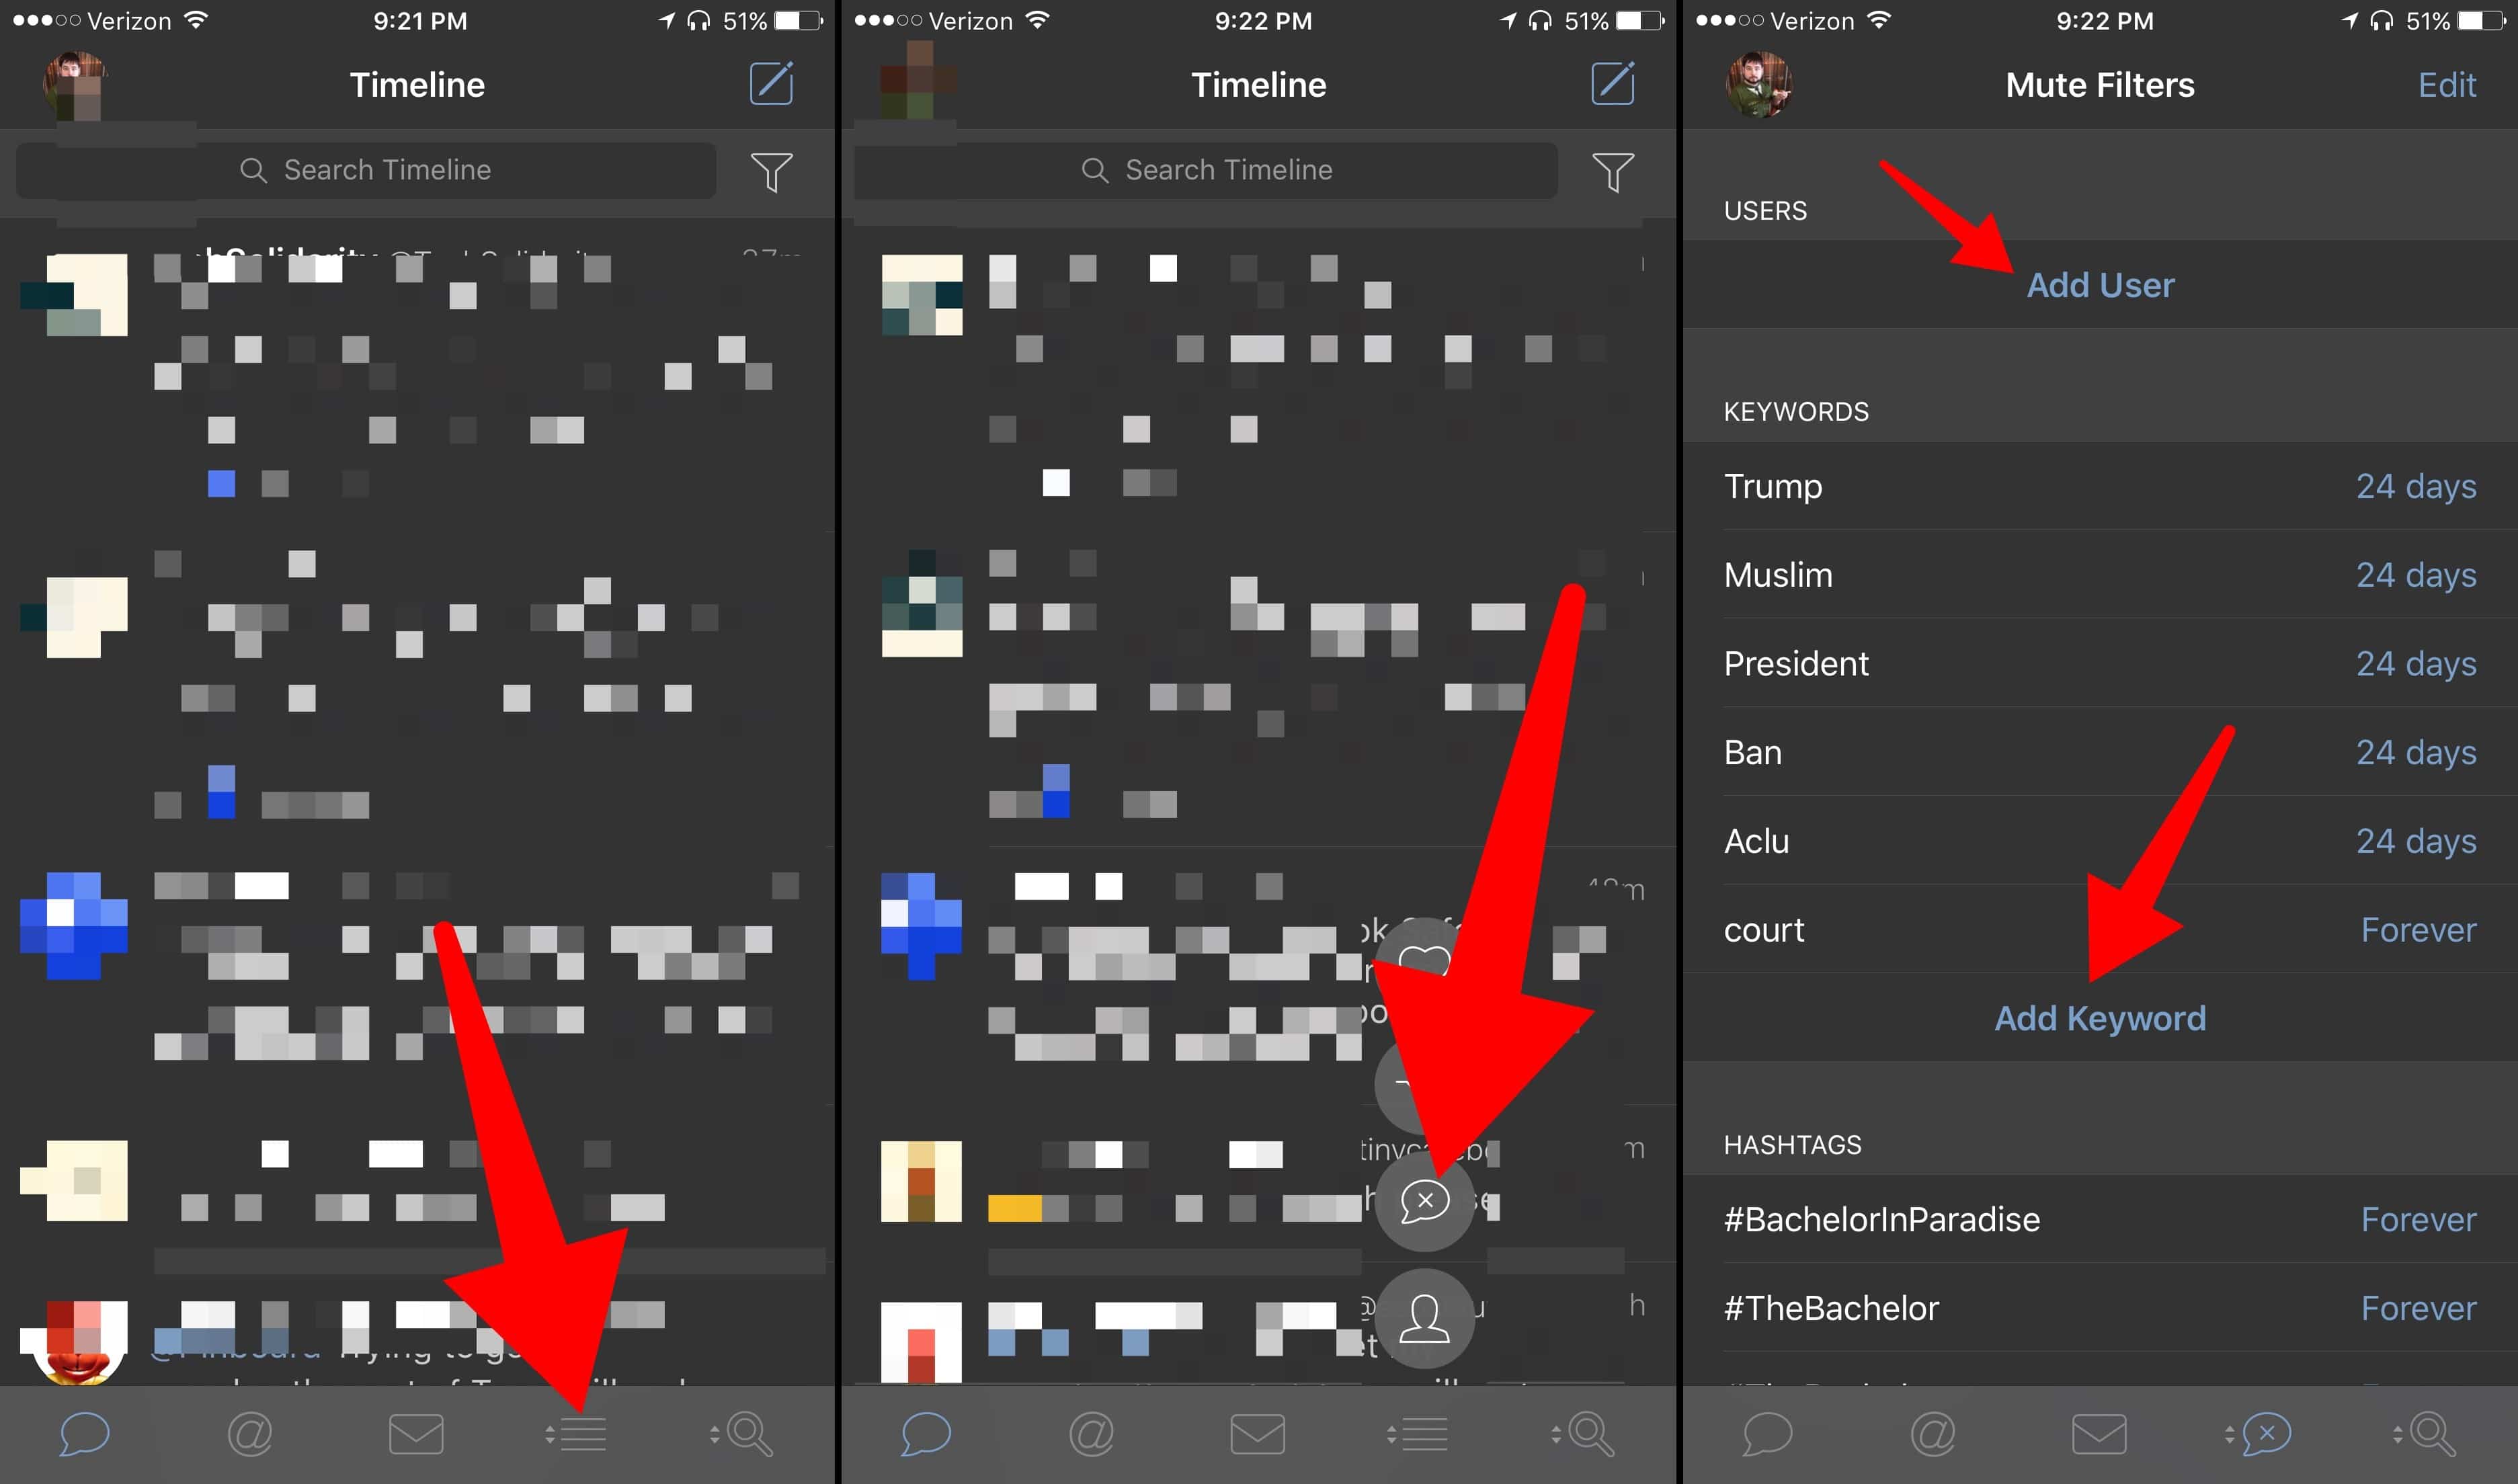 To hide keywords, hashtags, or users in TweetBot